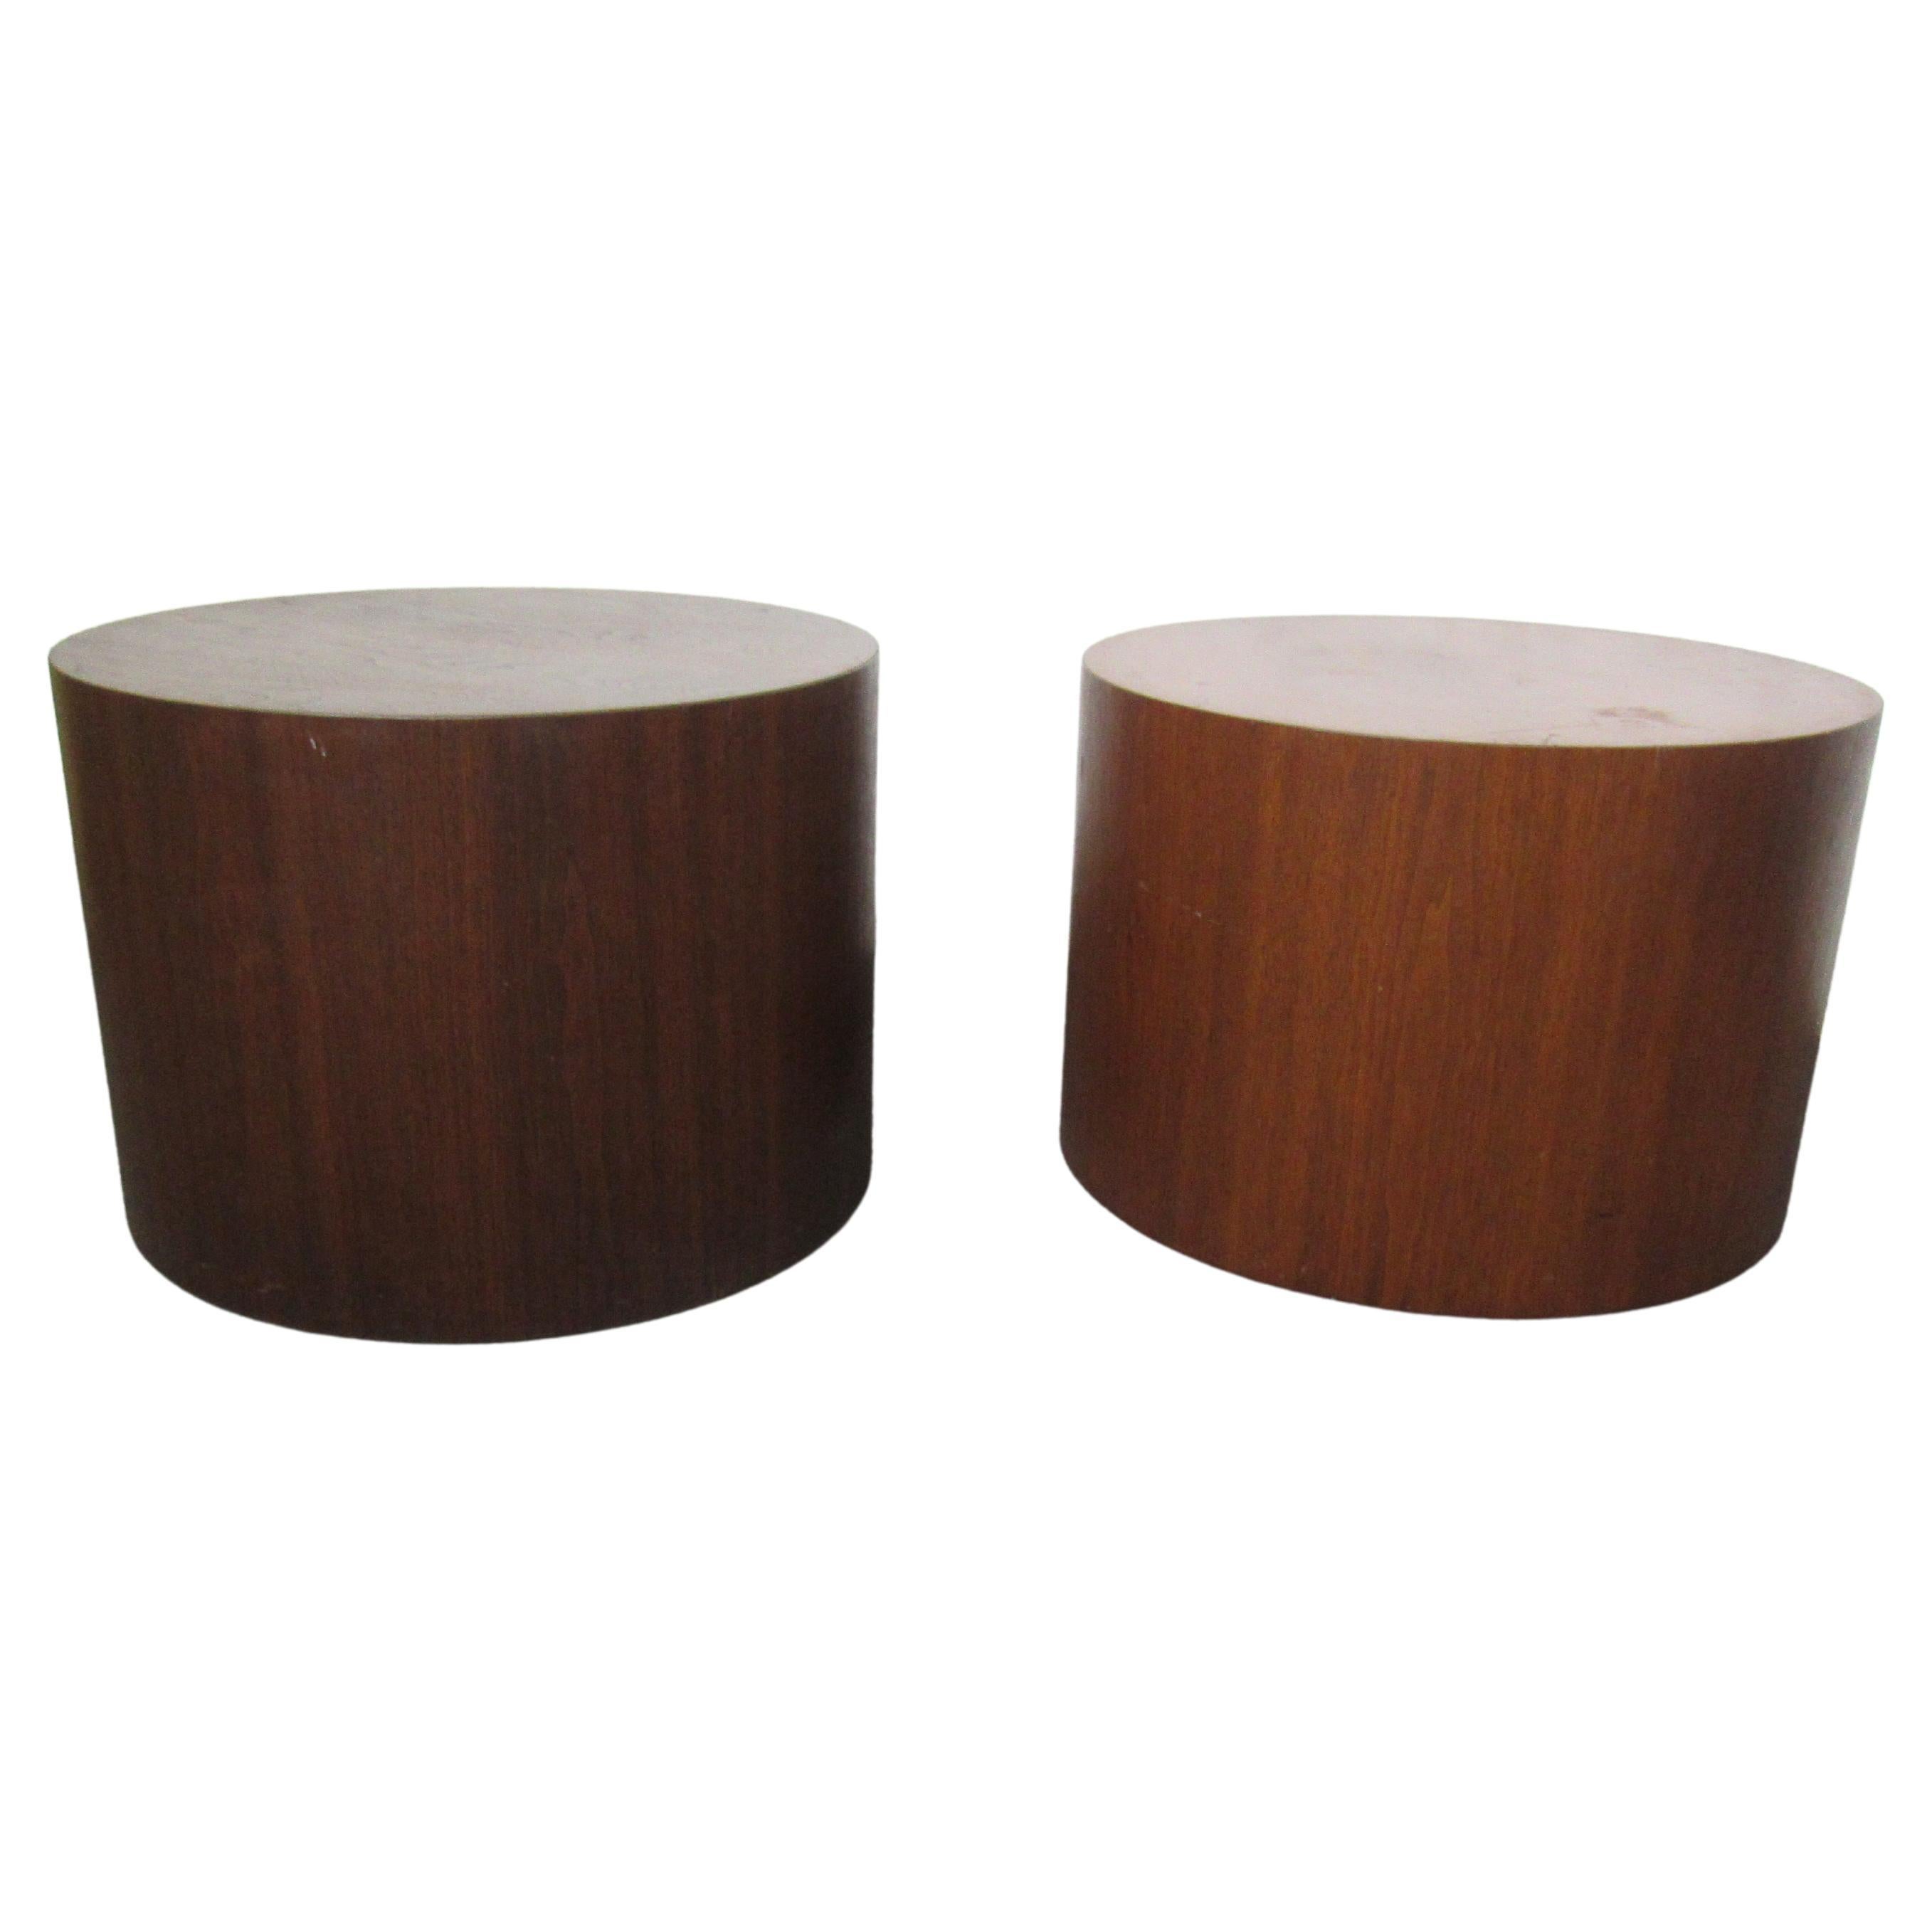 Pair of Wooden Cylindrical Side Tables